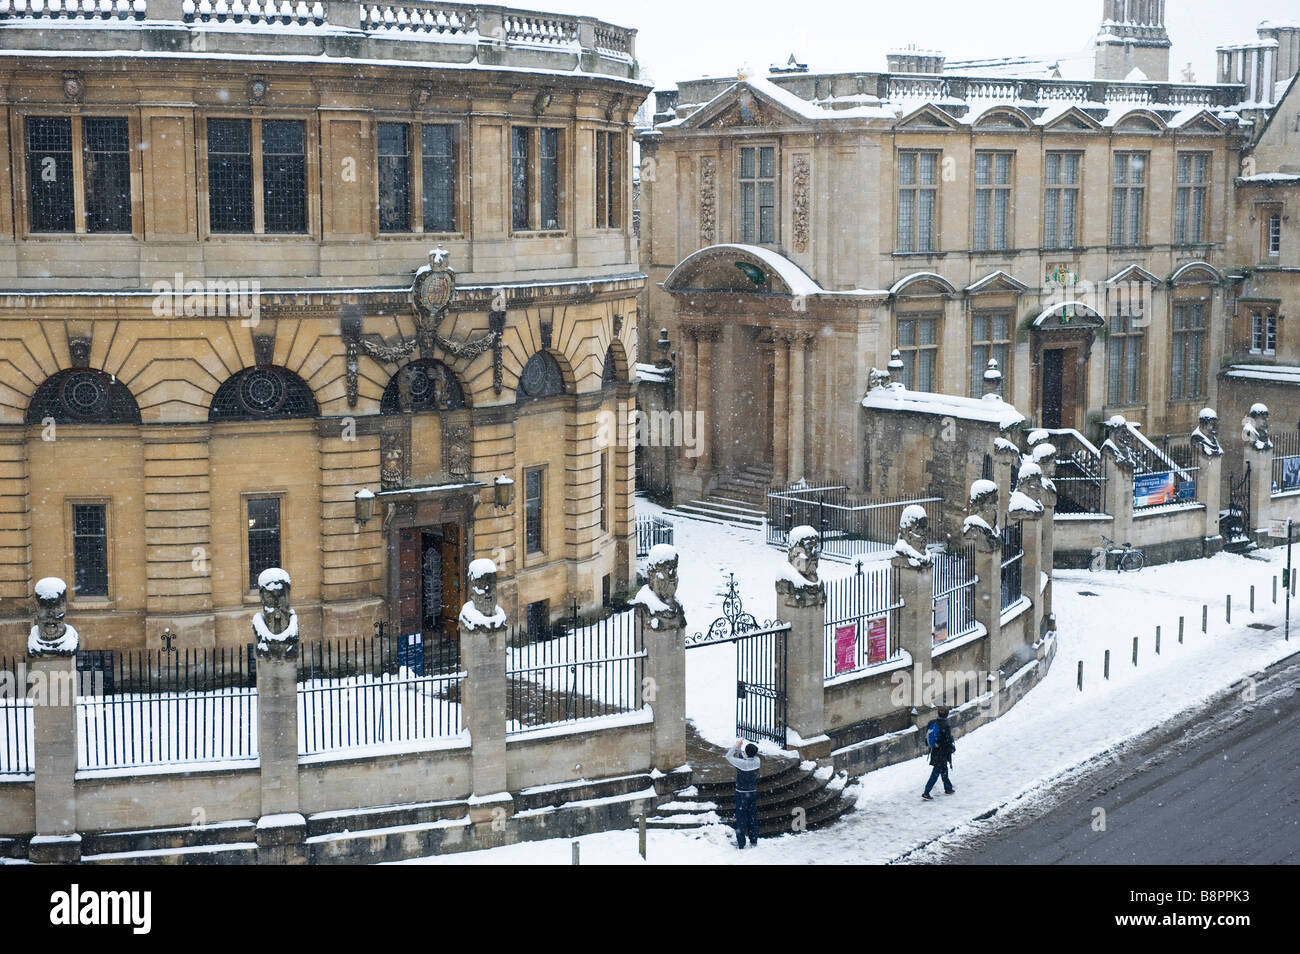 Snow covers the emperor statues and the Sheldonian theatre with Science Museum on right  in Oxford University Stock Photo